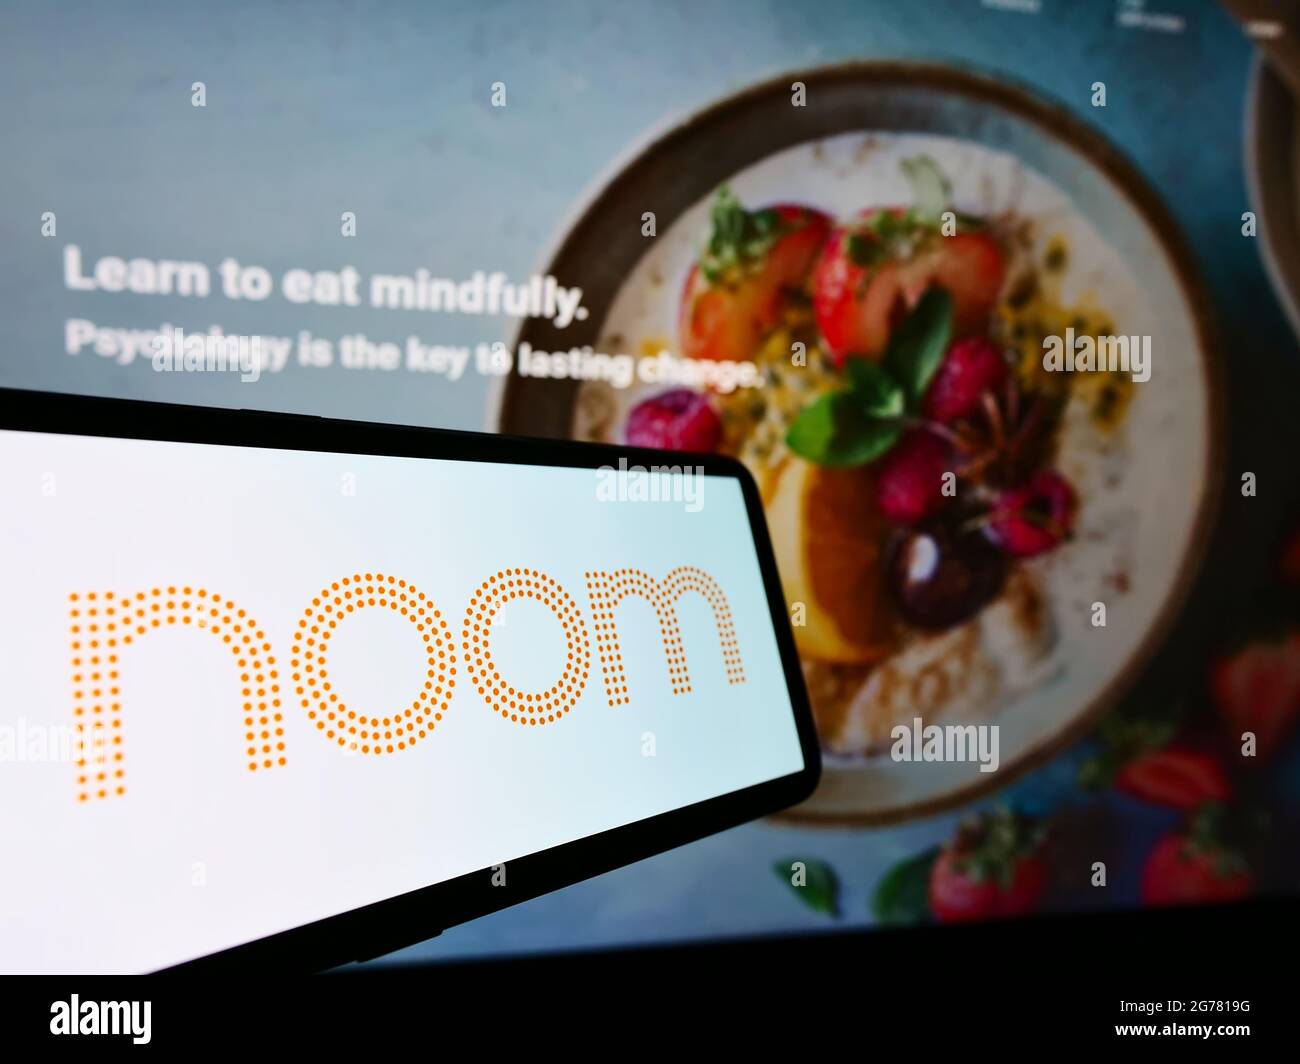 Smartphone with logo of US weight-loss platform company Noom Inc. on screen in front of business website. Focus on center-right of phone display. Stock Photo